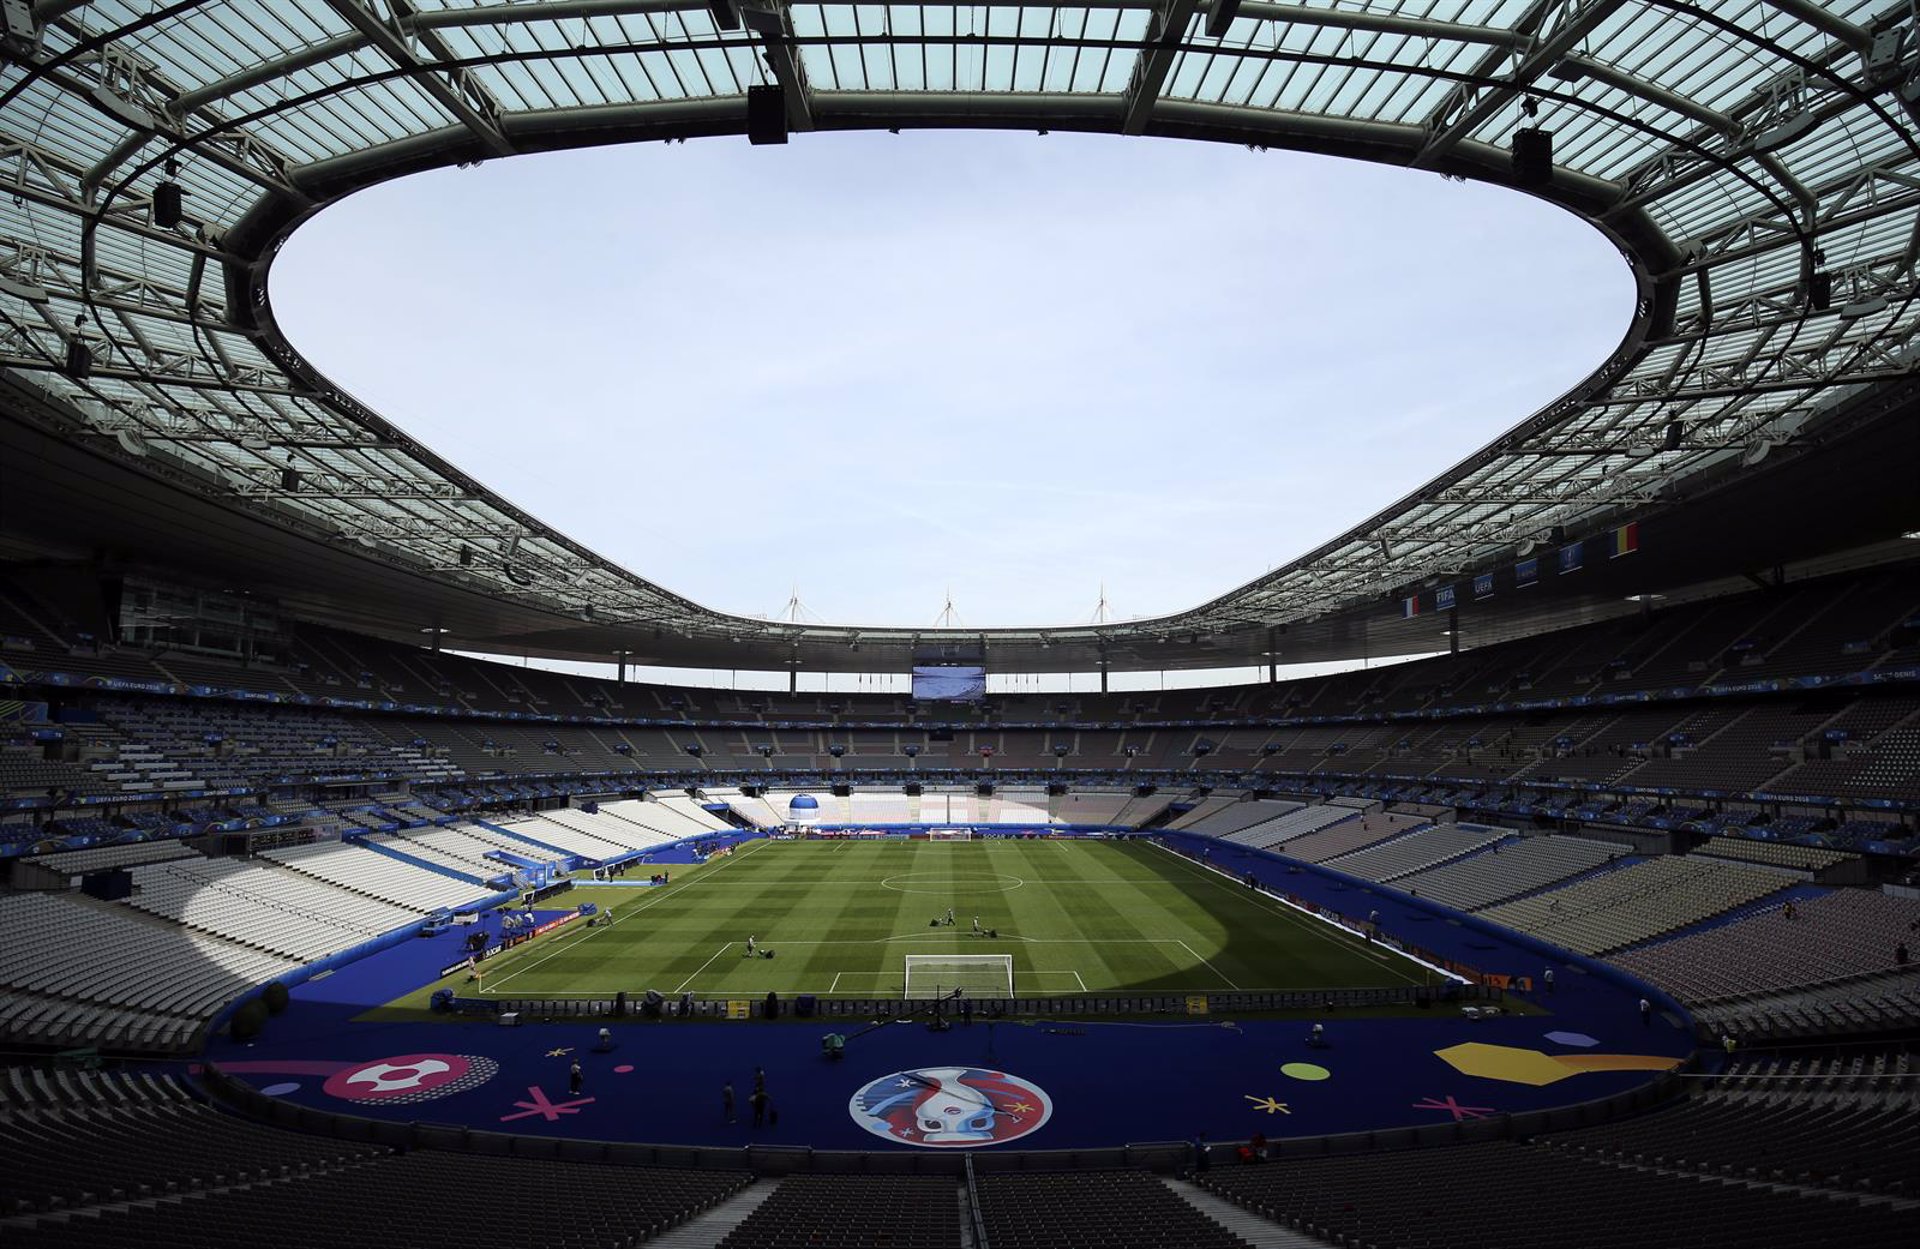 10/06/2016 FILED - 10 June 2016, France, Saint-Denis: A general view of the Stade de France. The Champions League final in May will be moved to the Stade de France in Paris from St Petersburg due to the Russian invasion of Ukraine, the European football governing body UEFA has said. Photo: Chris Radburn/PA Wire/dpa
DEPORTES
Chris Radburn/PA Wire/dpa | Foto: Europa Press